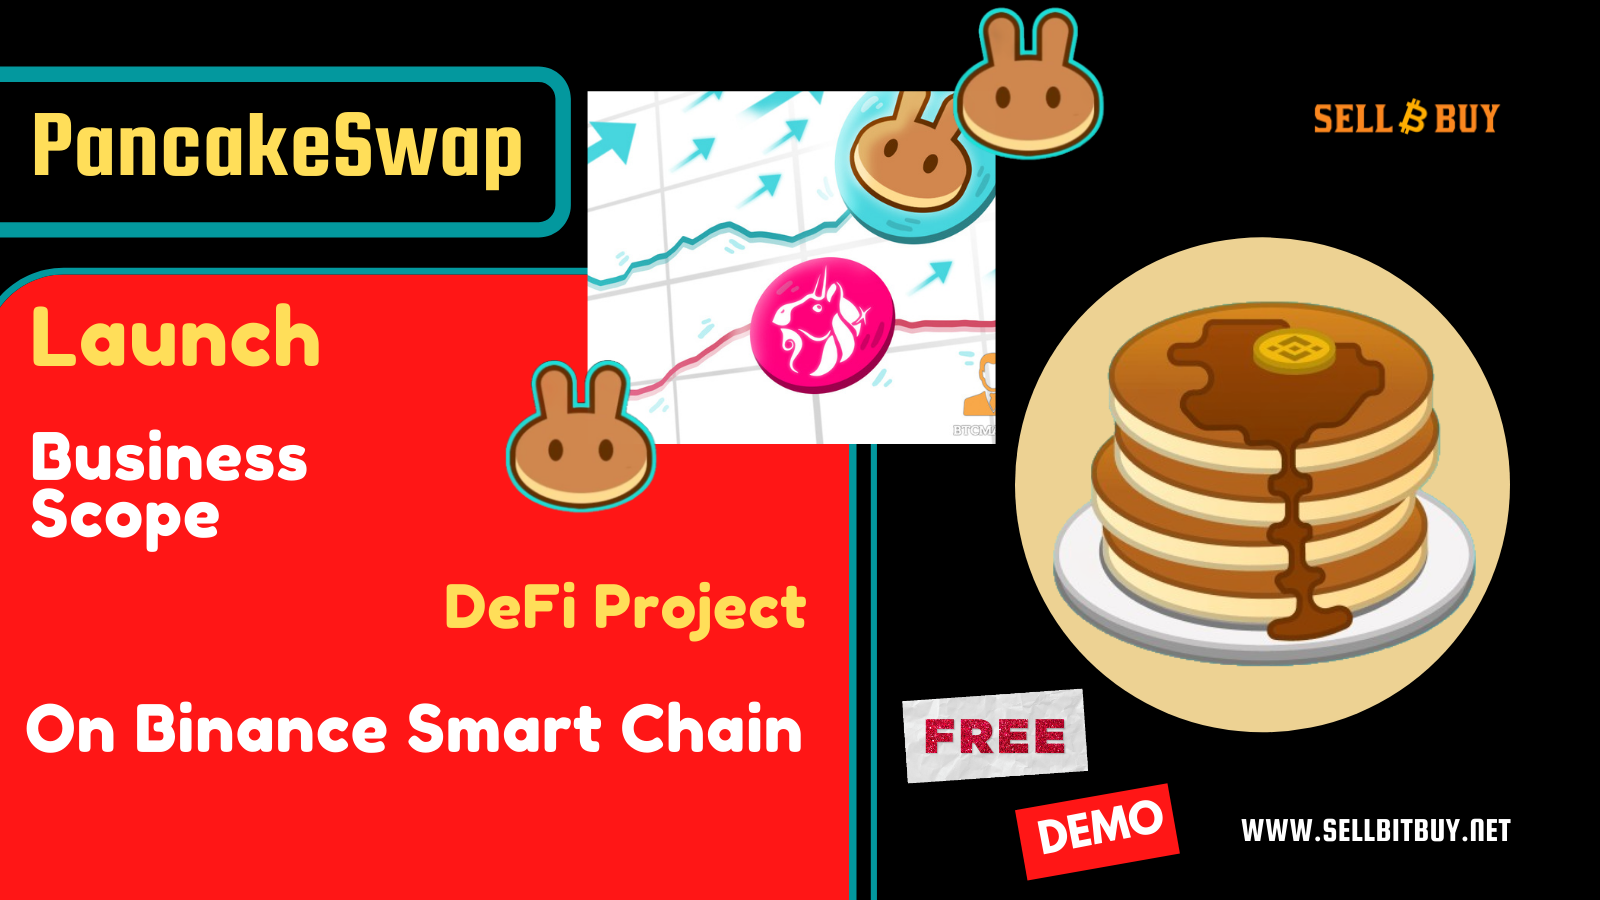 Article about How to start pancakeswap like BSC Based DeFi Project